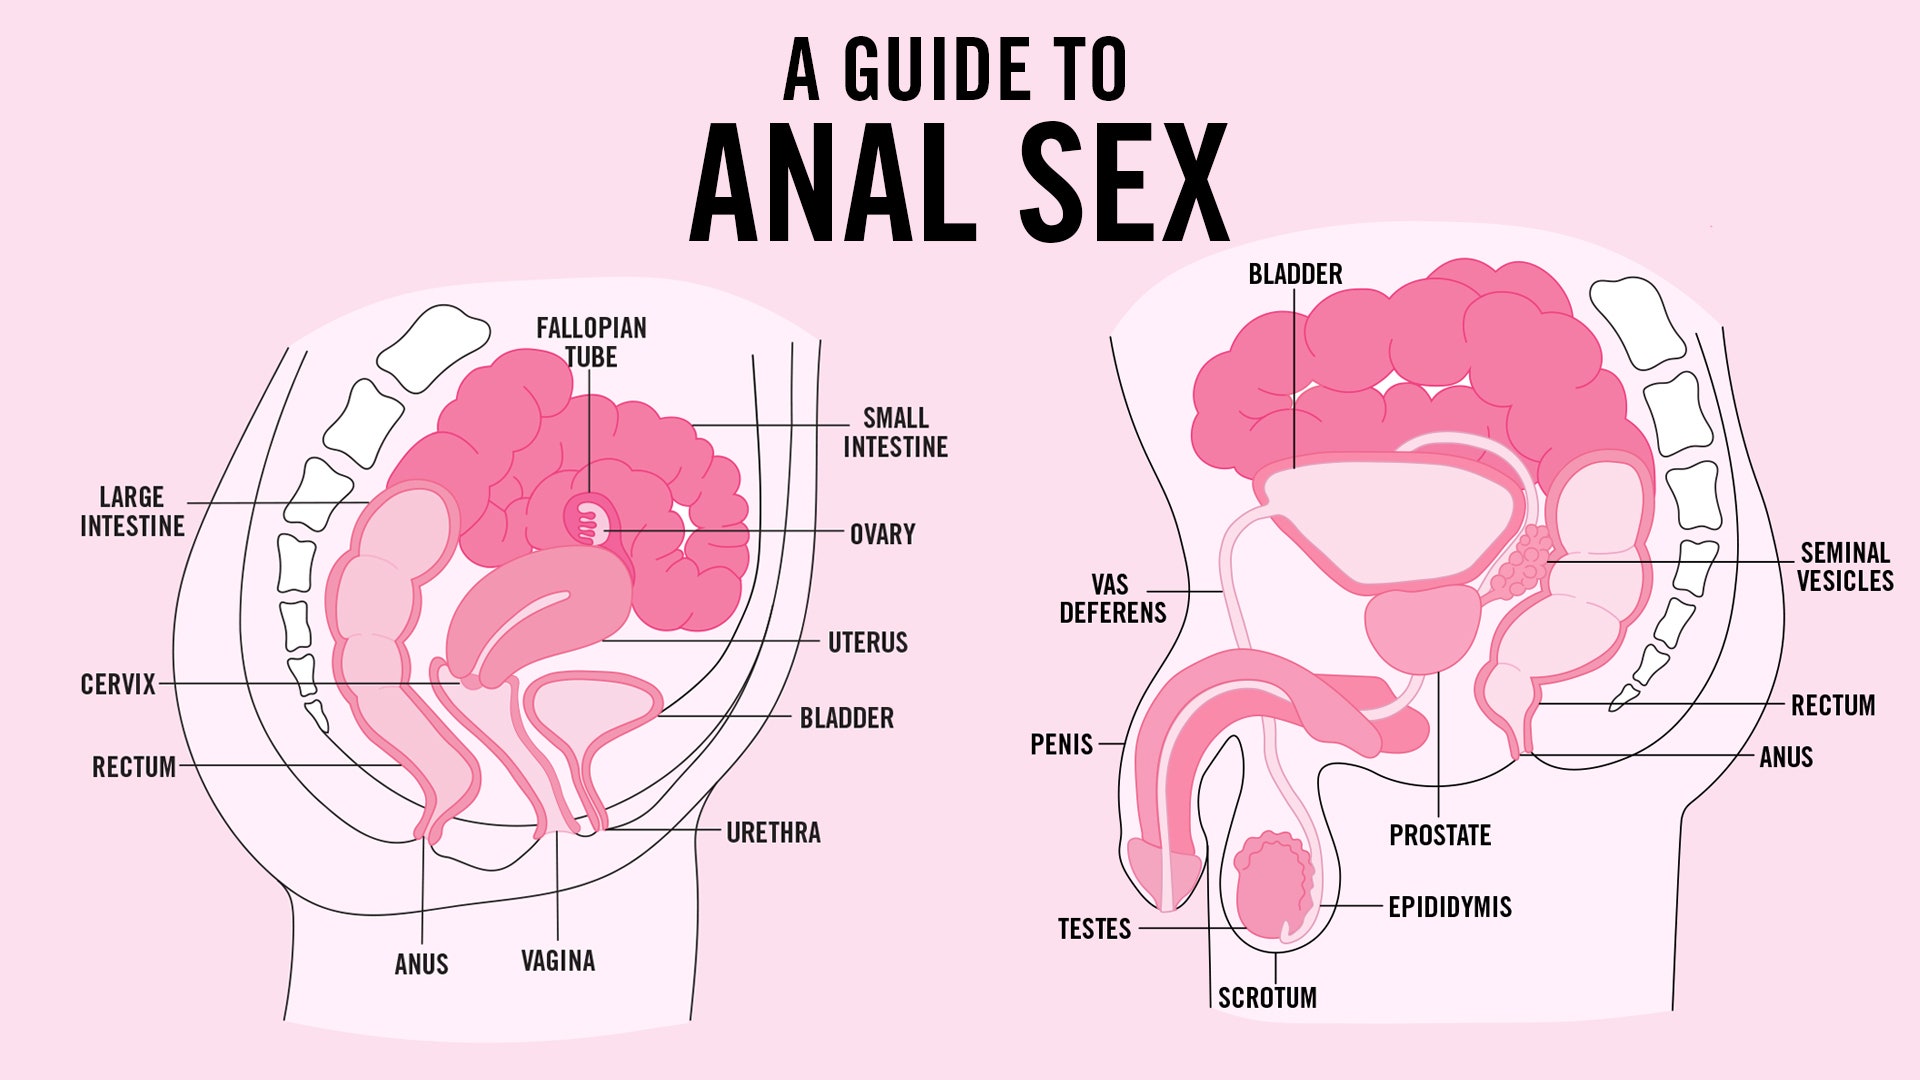 What to Know Before Going Anal